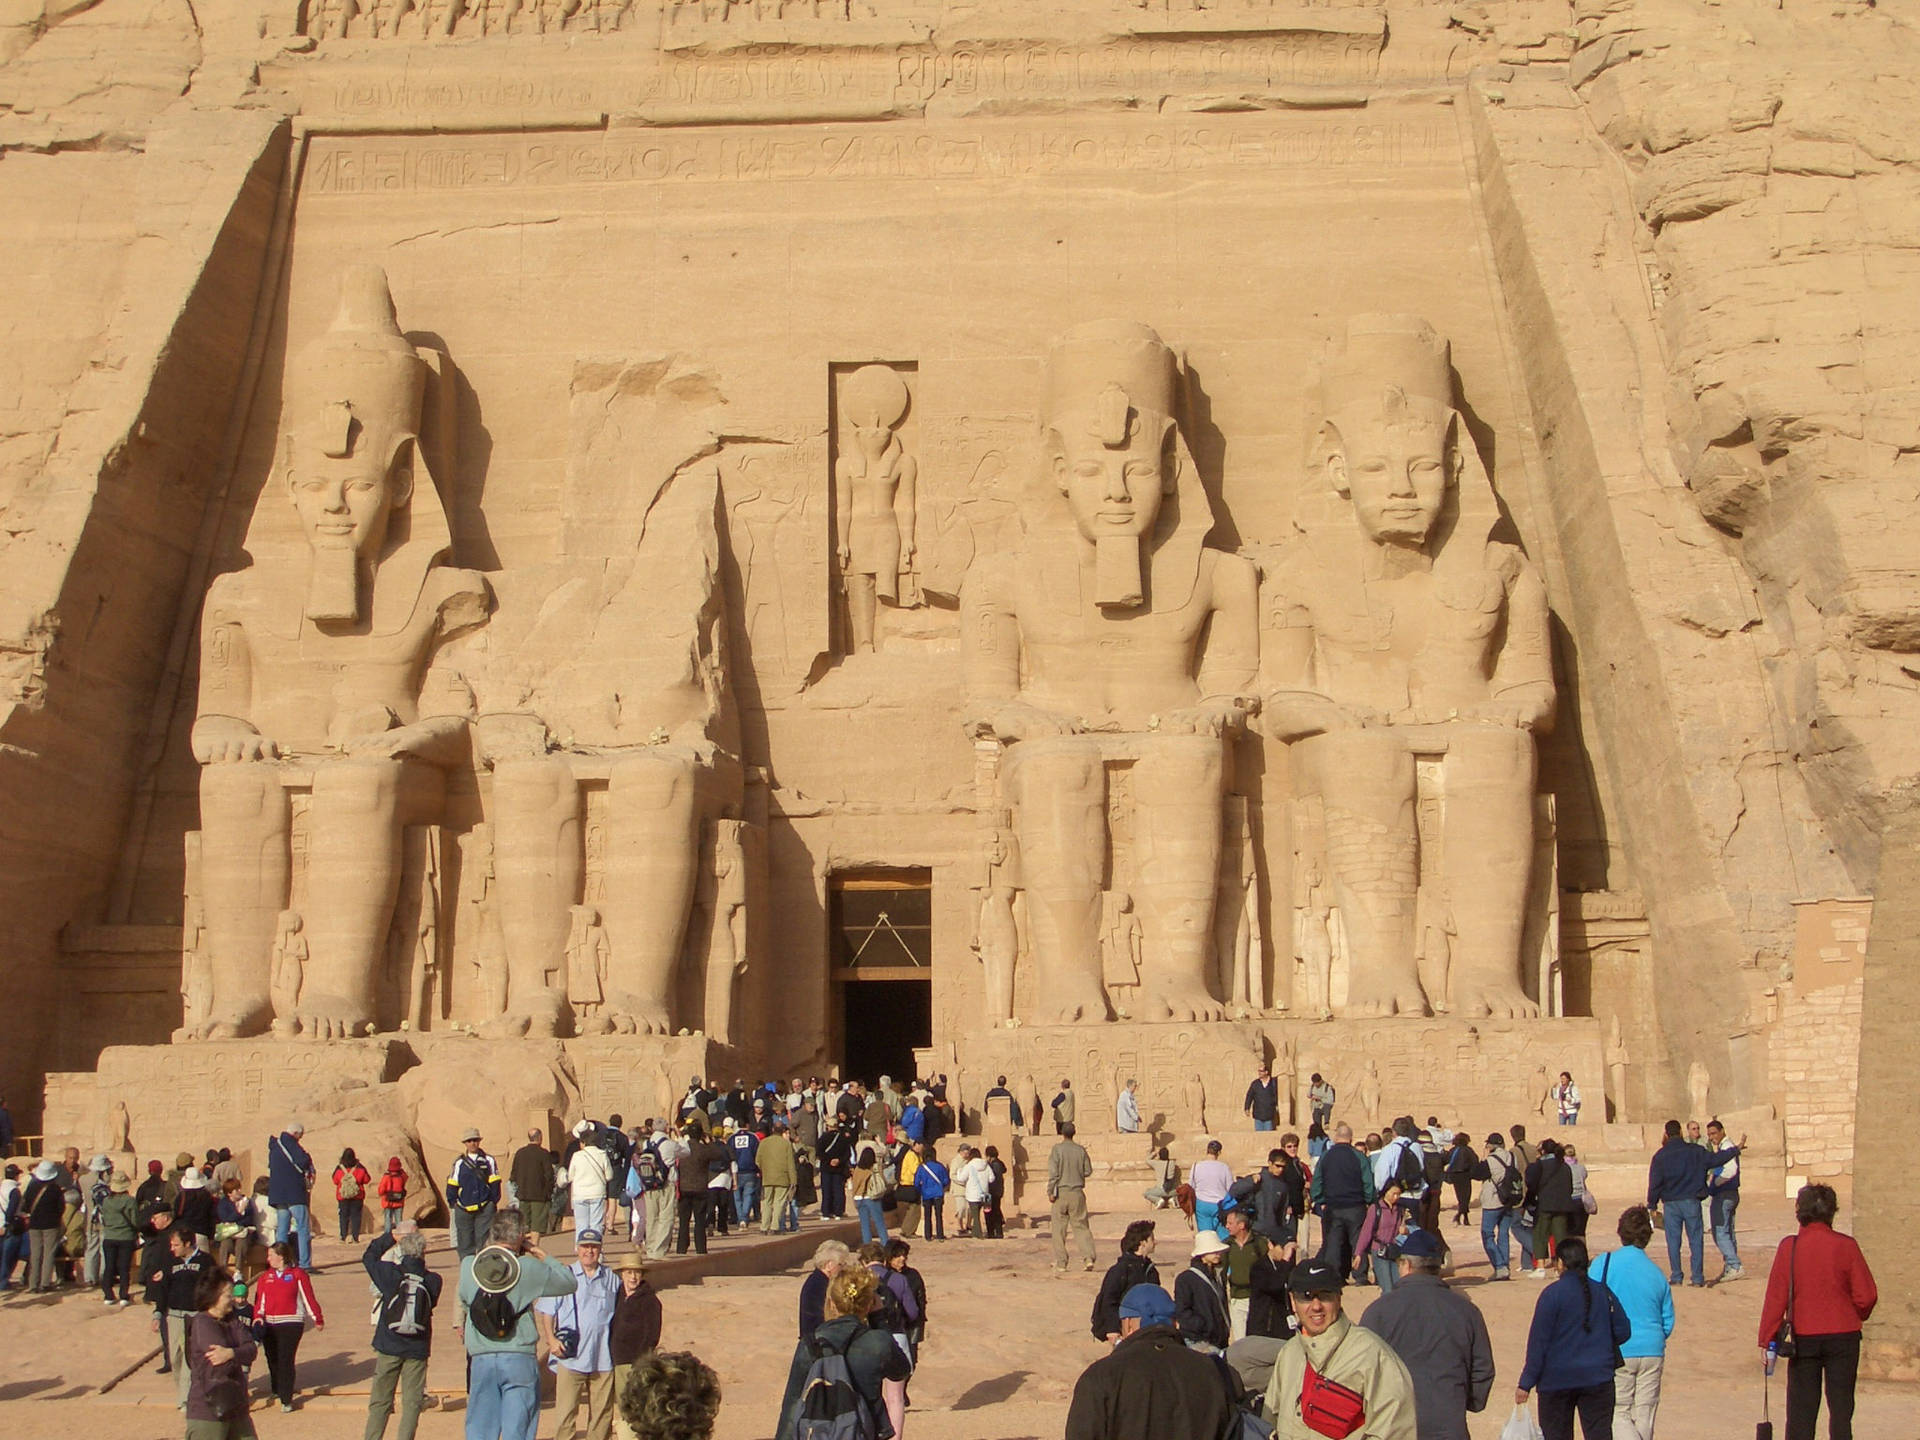 The Crowded Great Temple Of Abu Simbel. Wallpaper